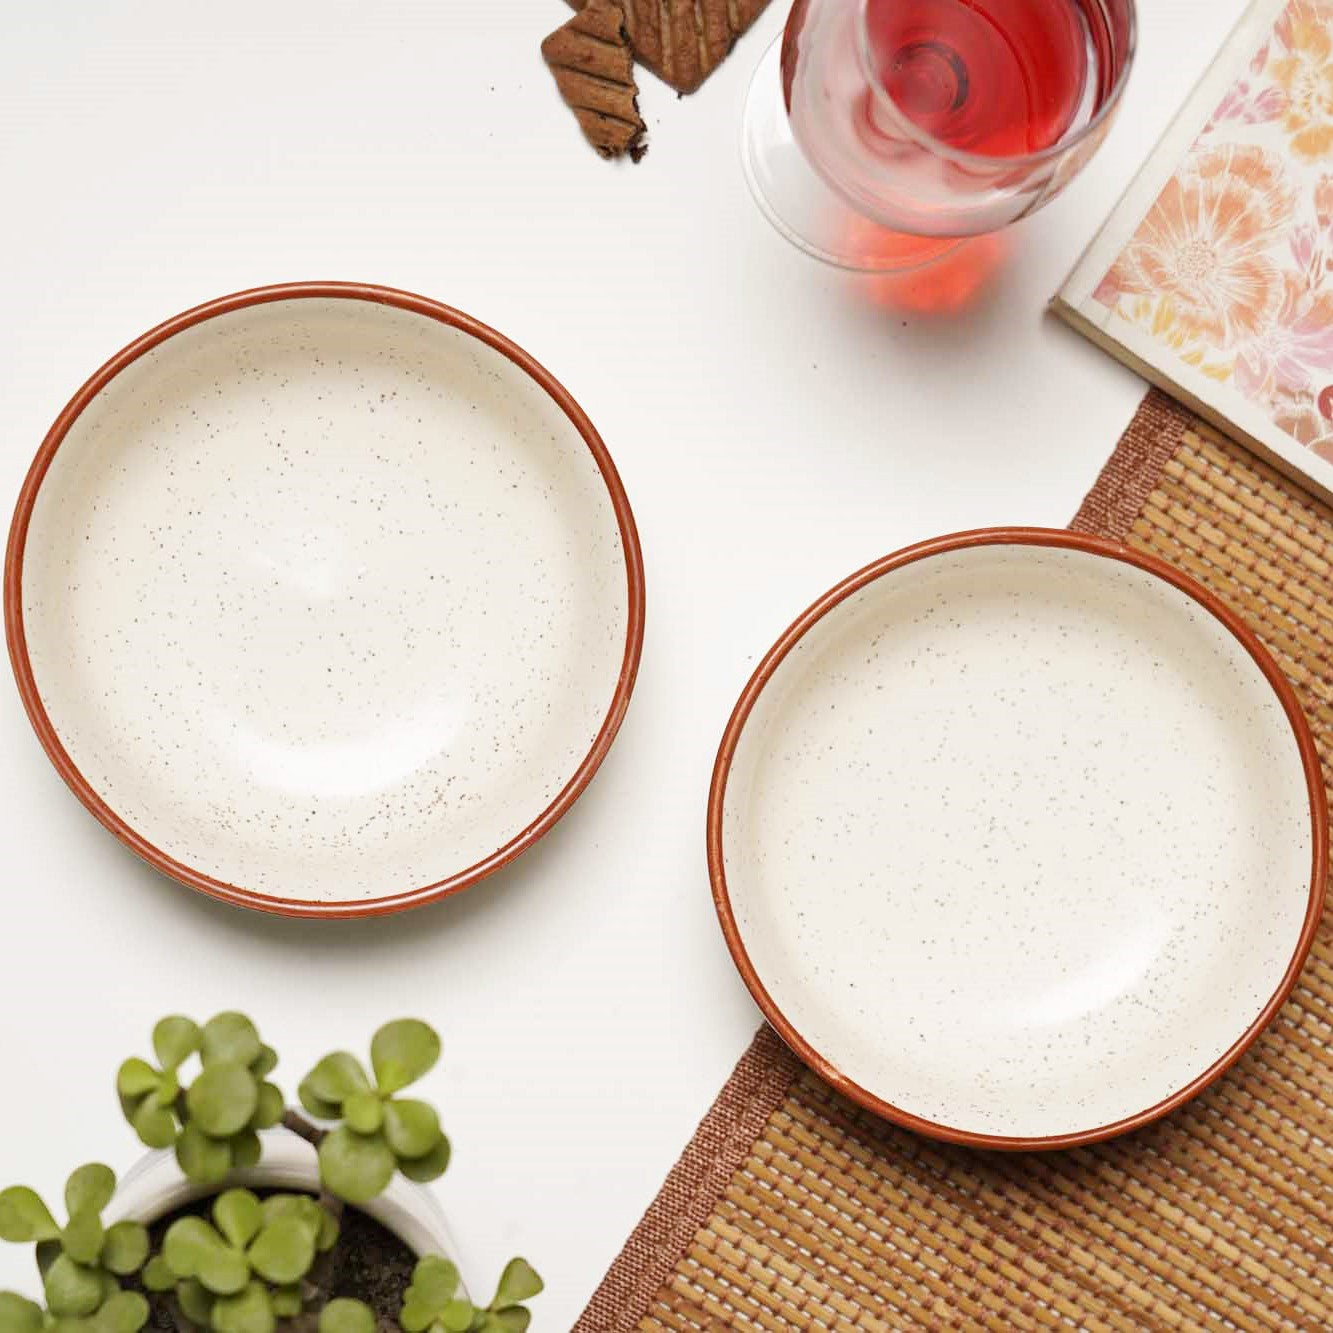 Cookie Crumble - Snack/Soup Bowls - Set of 2 and 6